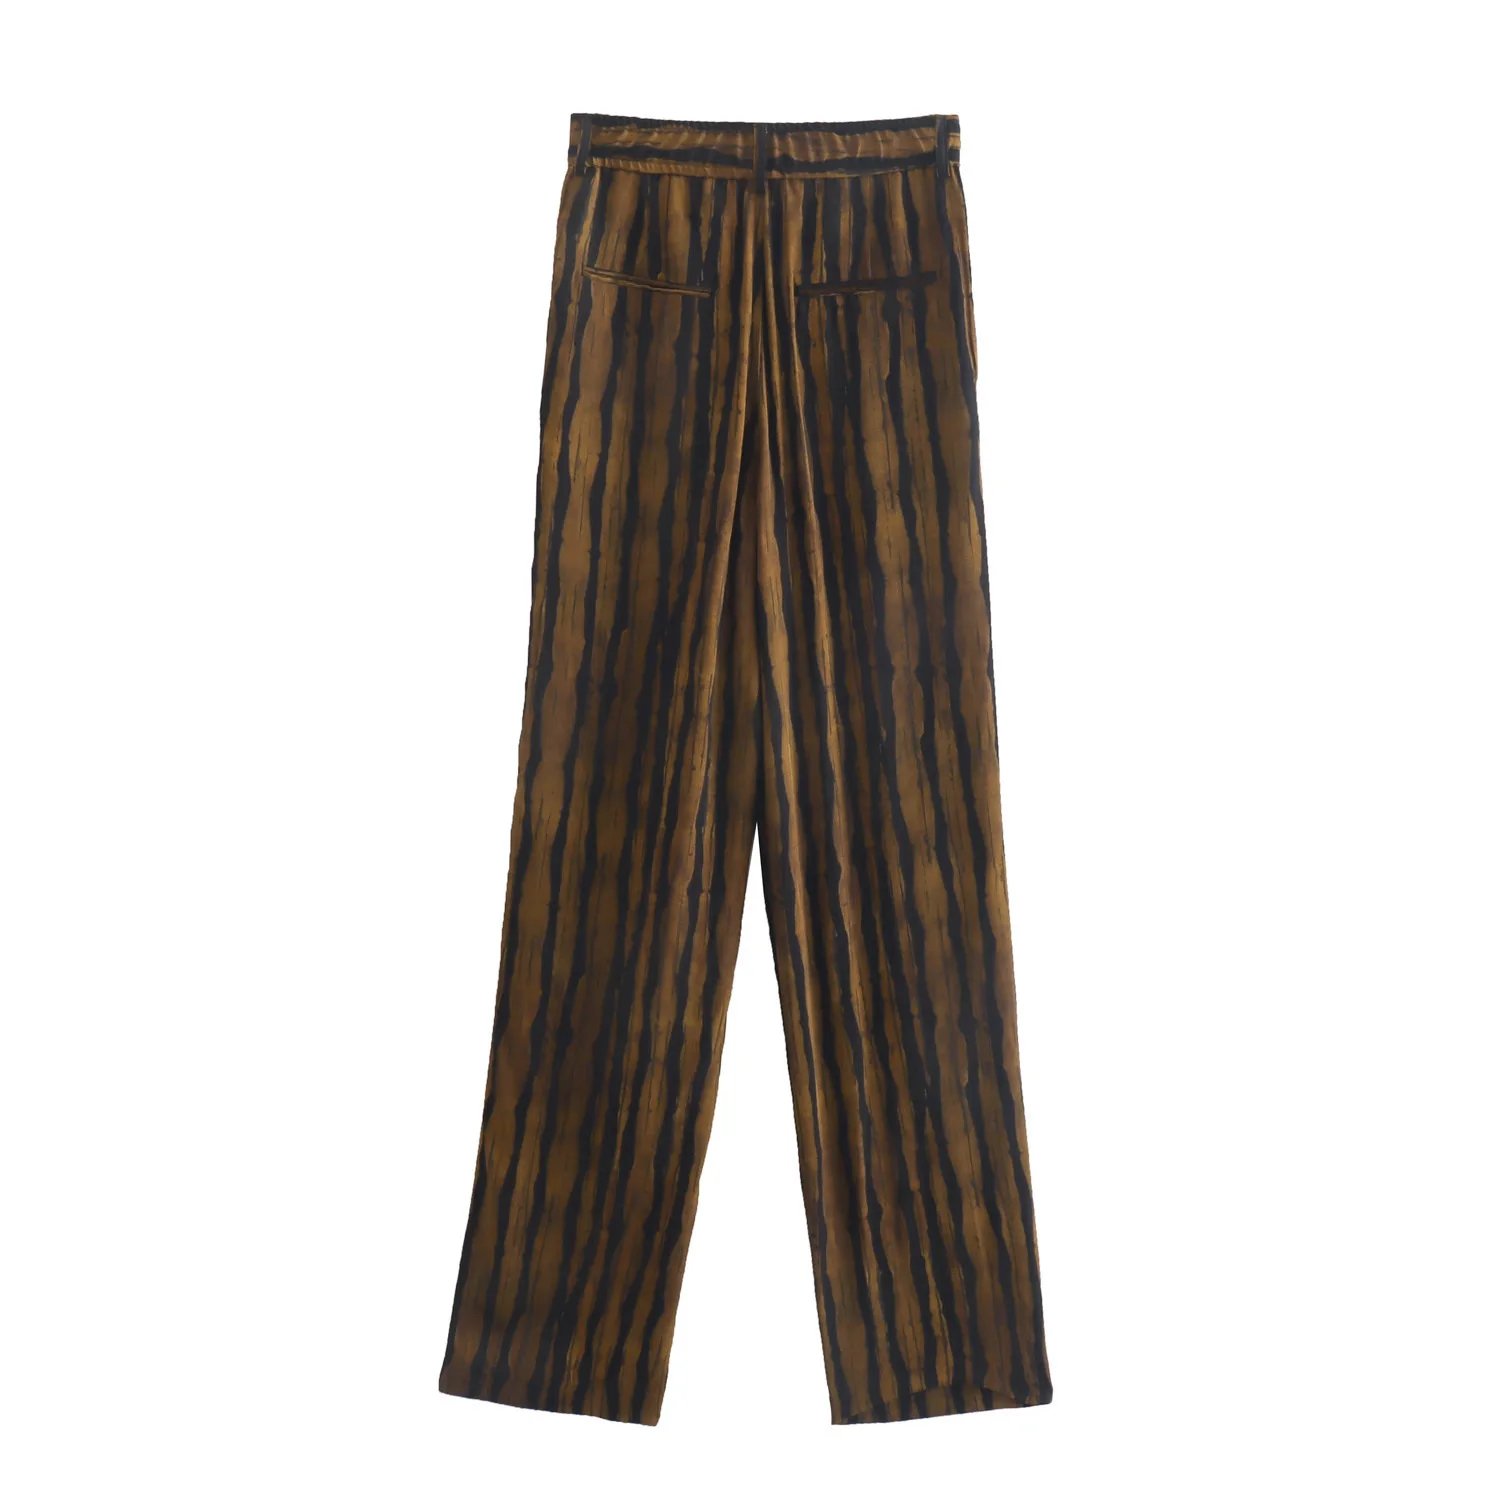 baggy pants Nlzgmsj ZBZA Women Spring Women Wide Leg Pants Vintage Striped High Waist Thick Straight Trousers Side Pleated Baggy Pant 202202 corduroy pants